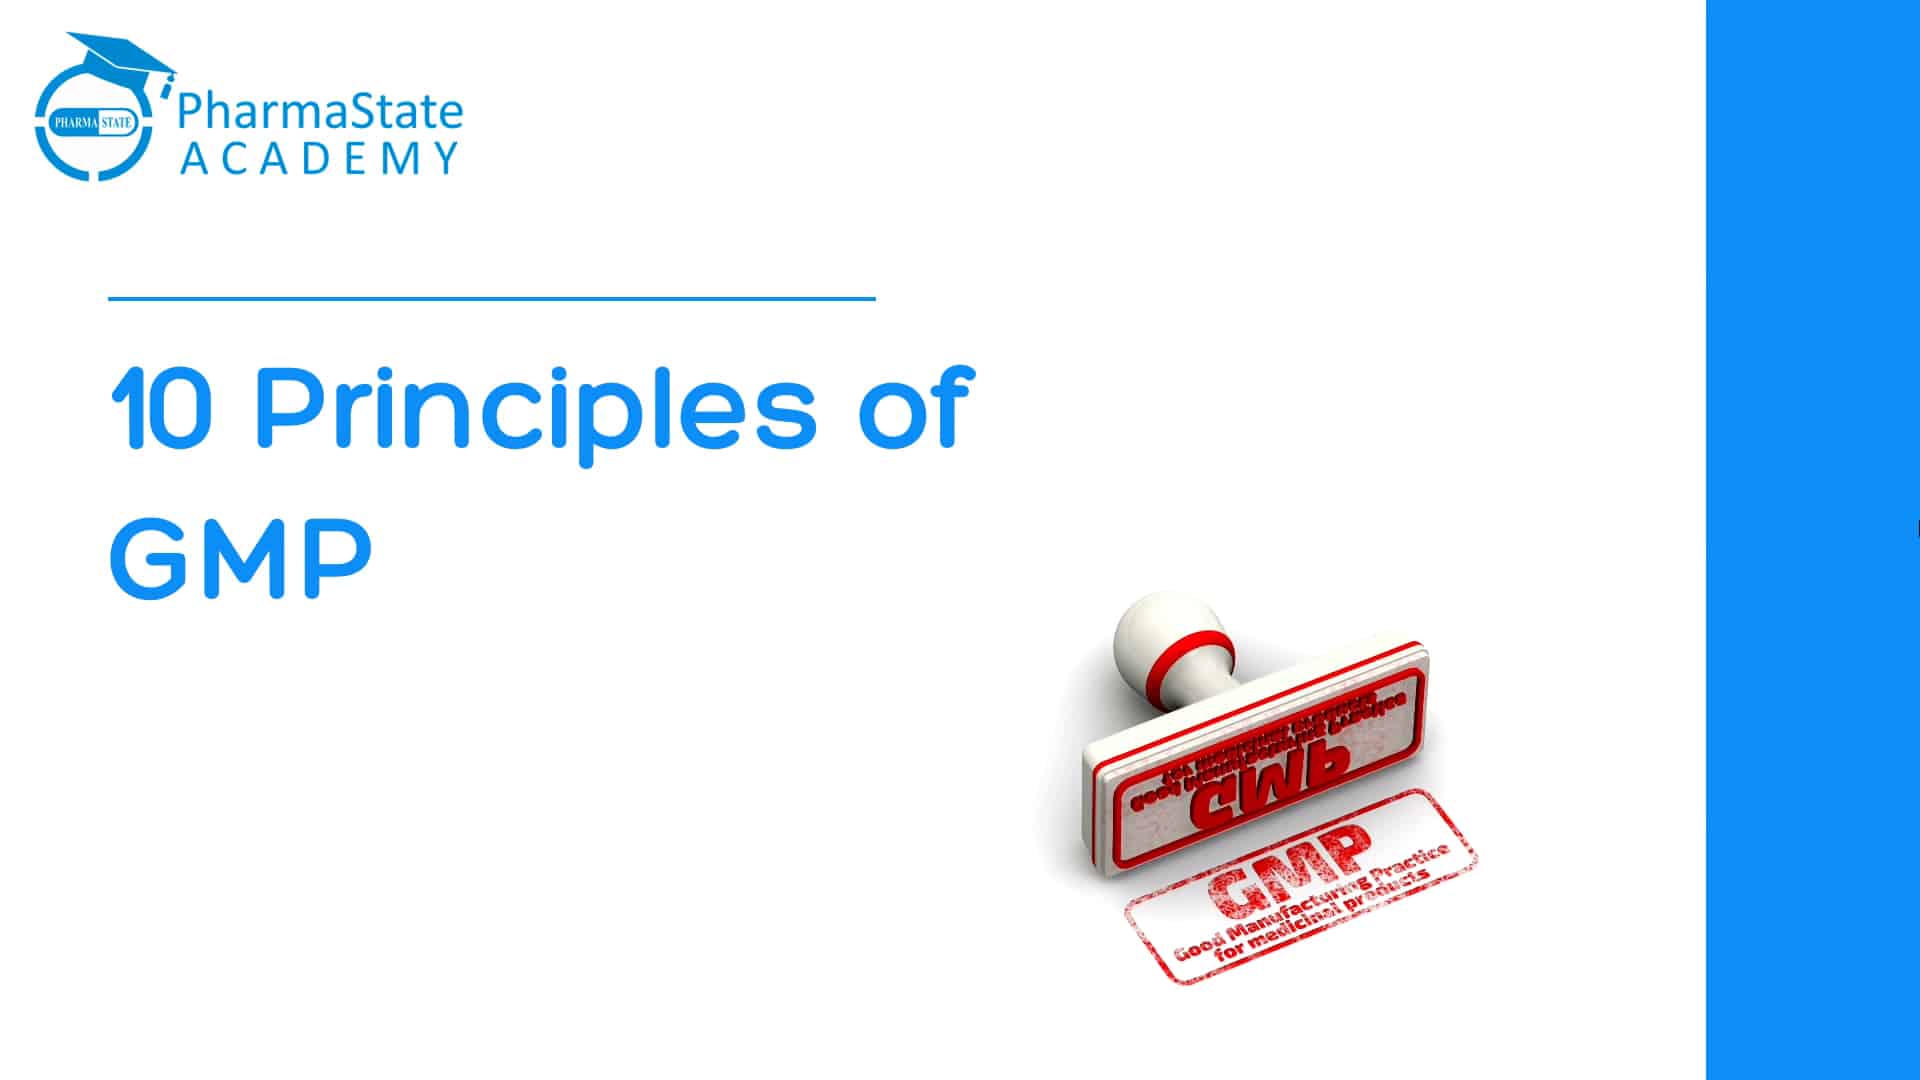 10 Principles of GMP (Good Manufacturing Practices) In Pharma